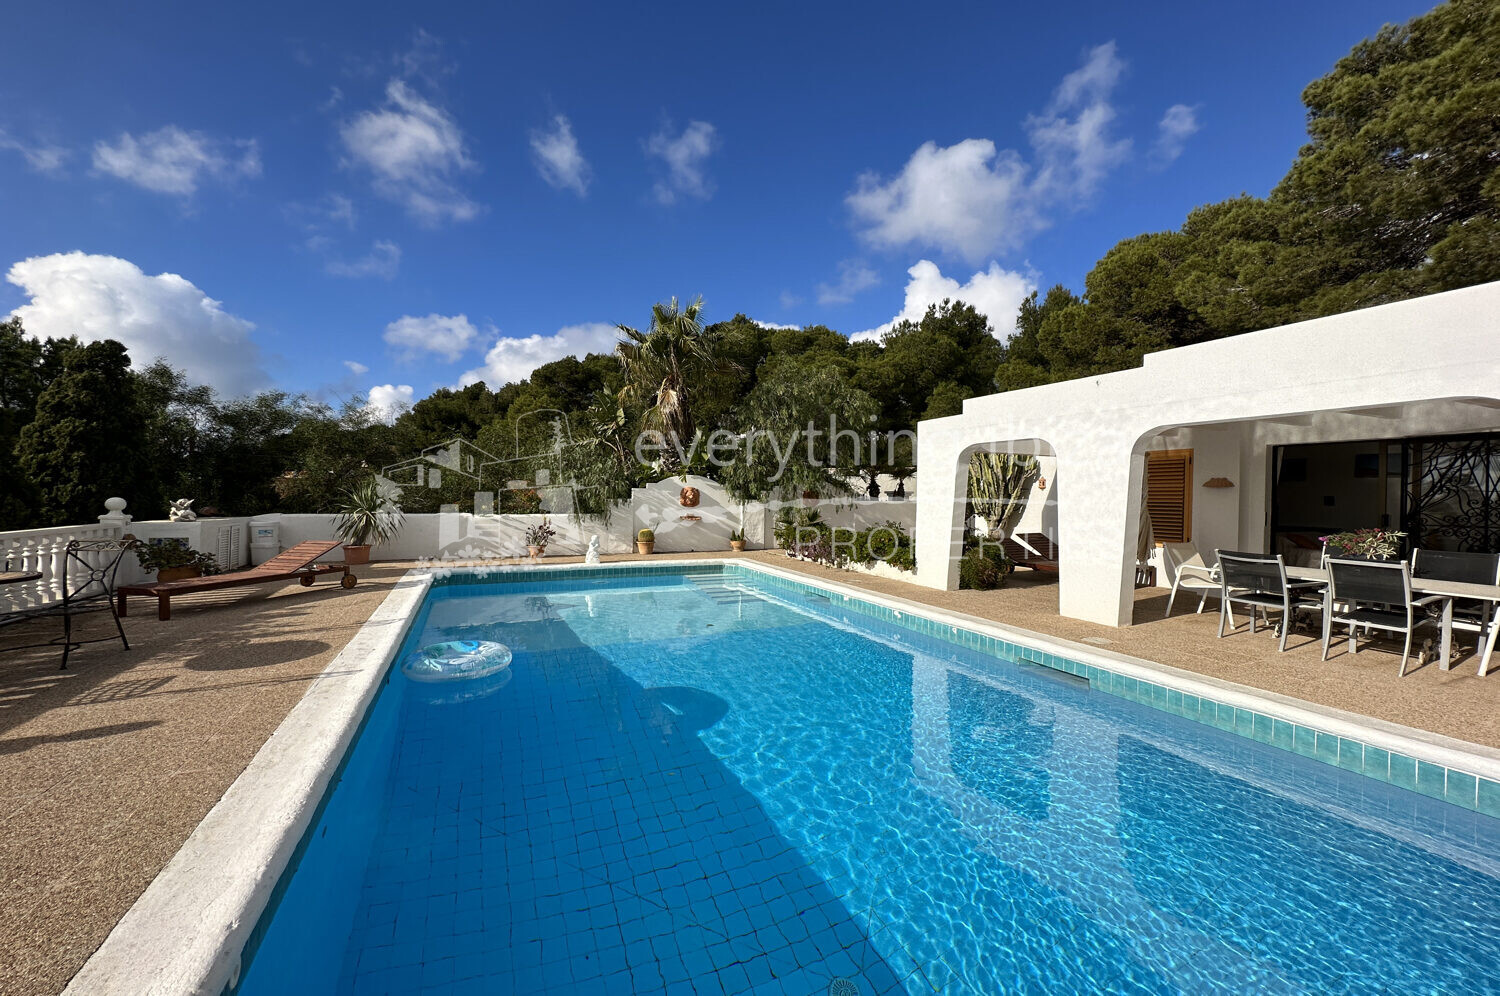 Charming Traditional Villa with Super Views of Es Vedra, ref. 1521, for sale in Ibiza by everything ibiza Properties